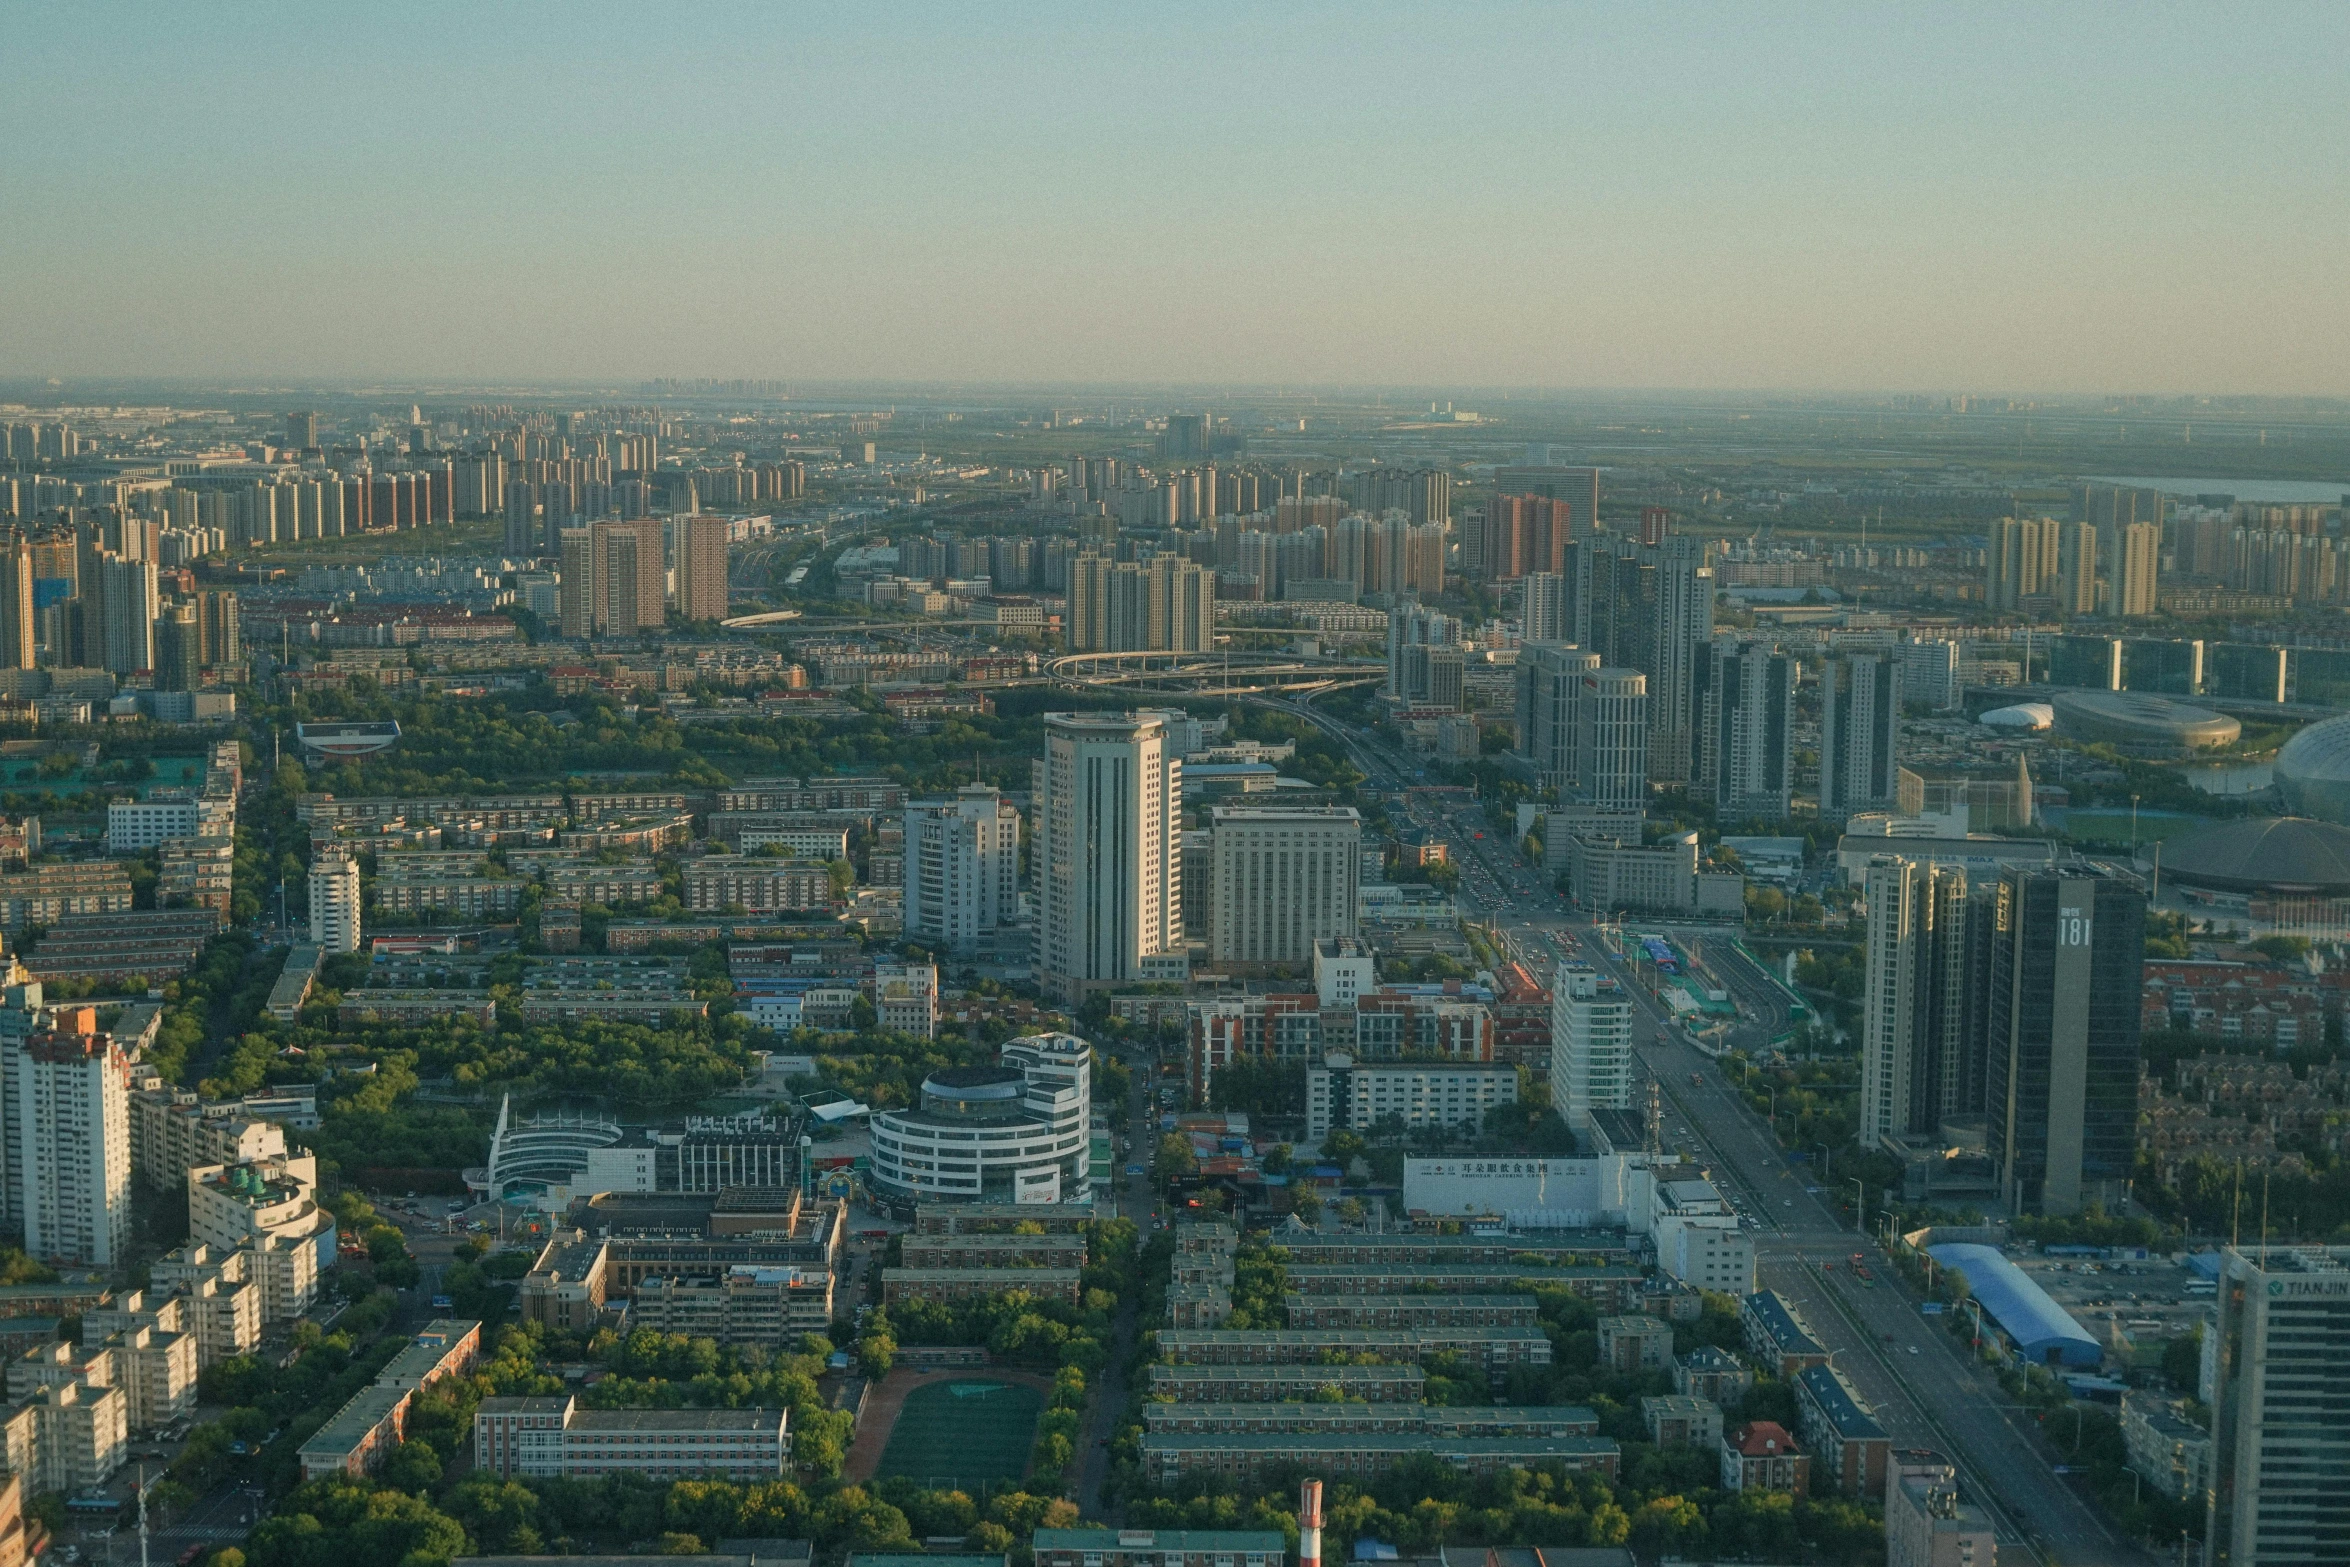 an aerial view of a city with lots of tall buildings, a picture, happening, baotou china, high res 8k, rectangle, image